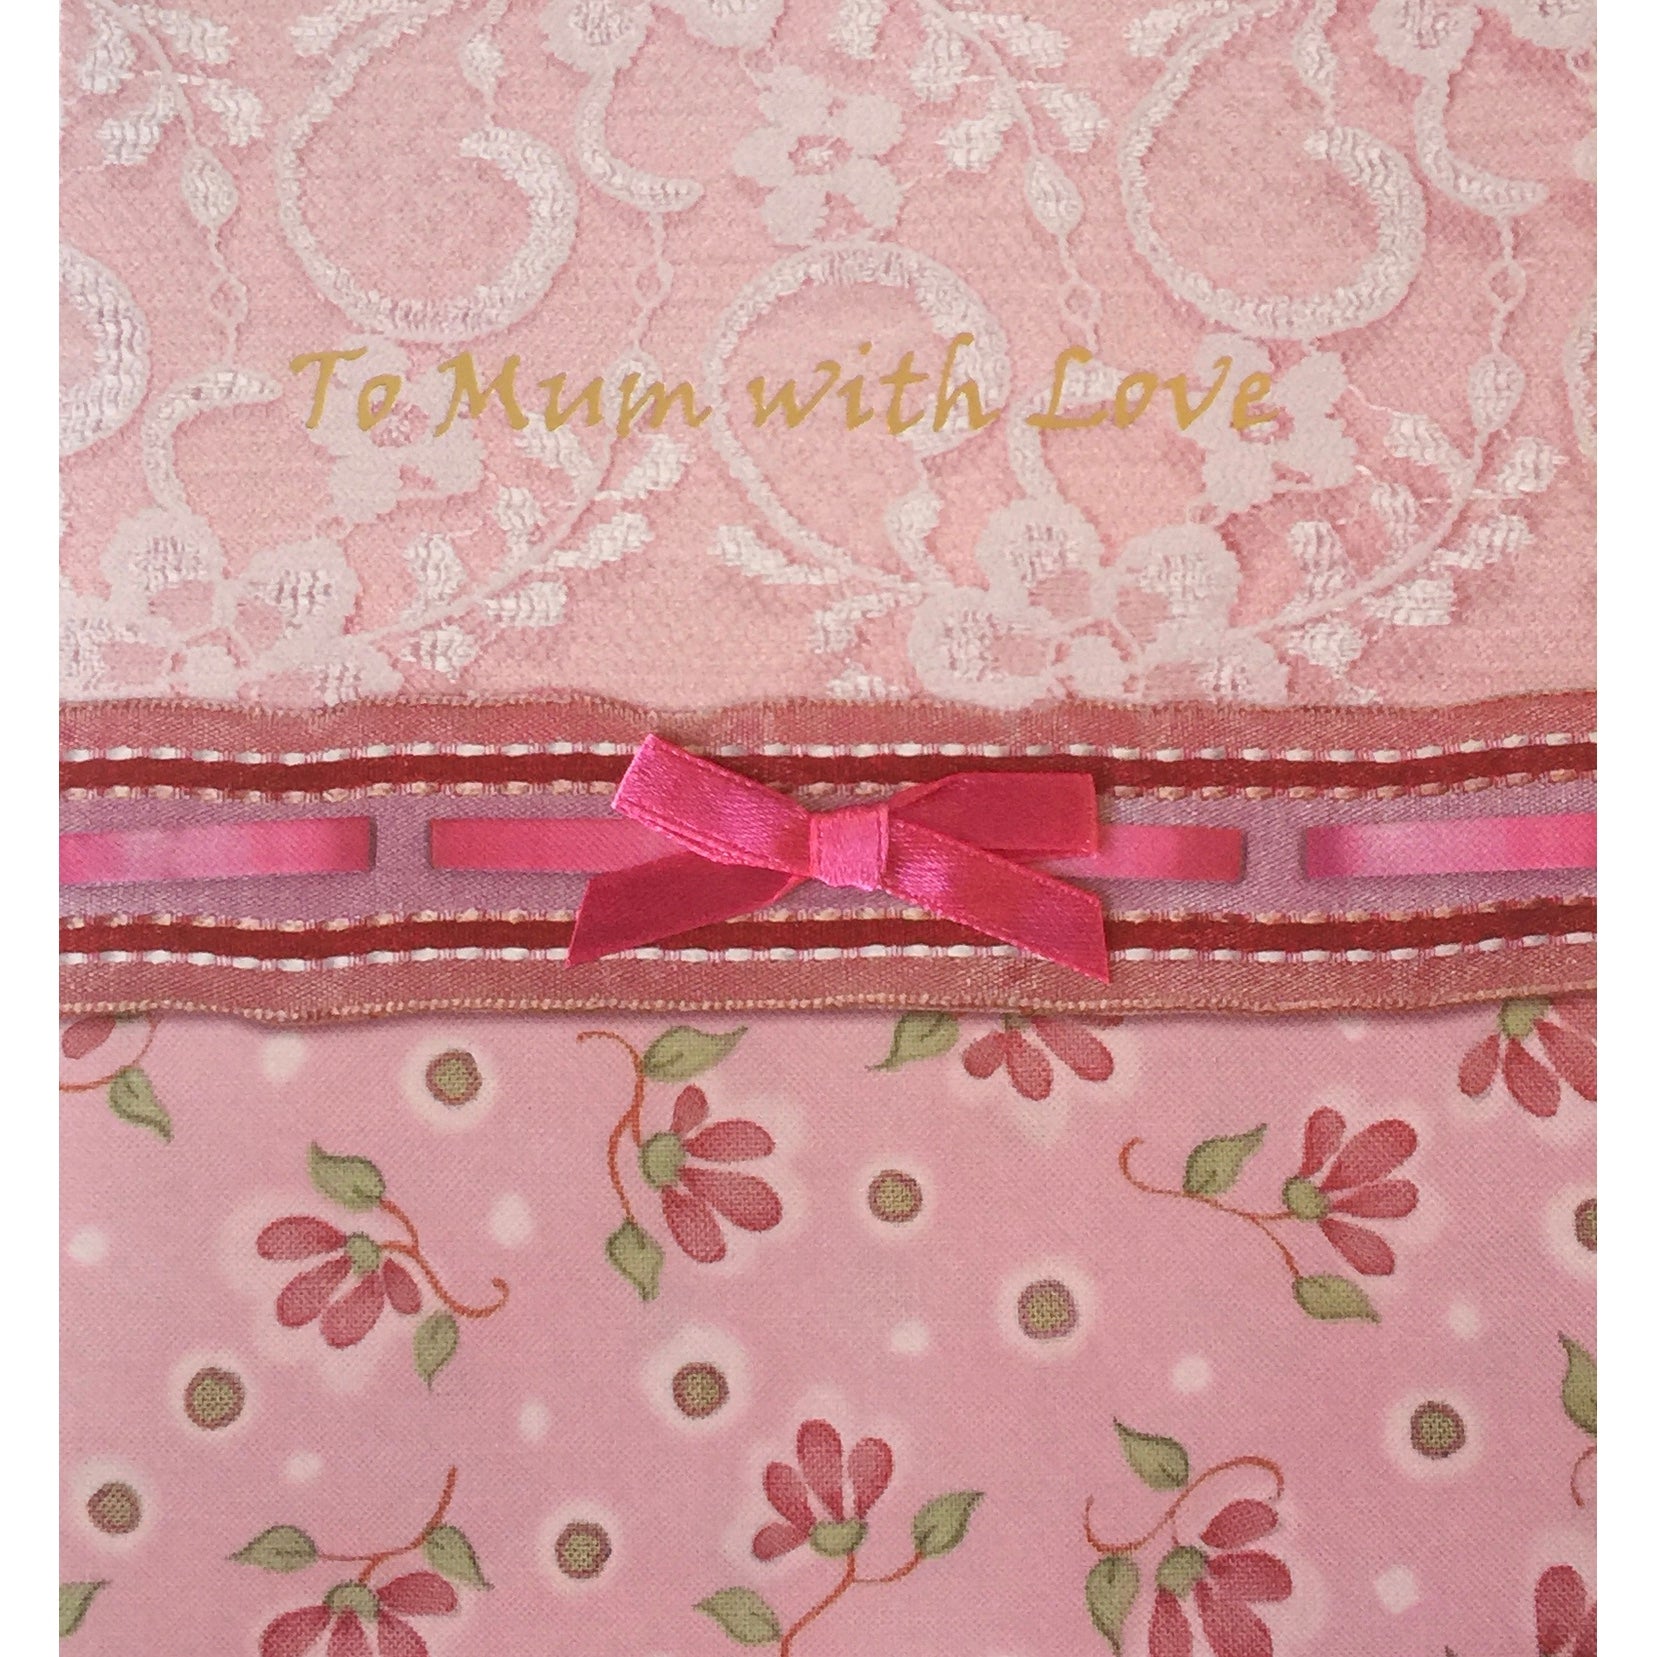 "To Mum with Love" Greeting Card